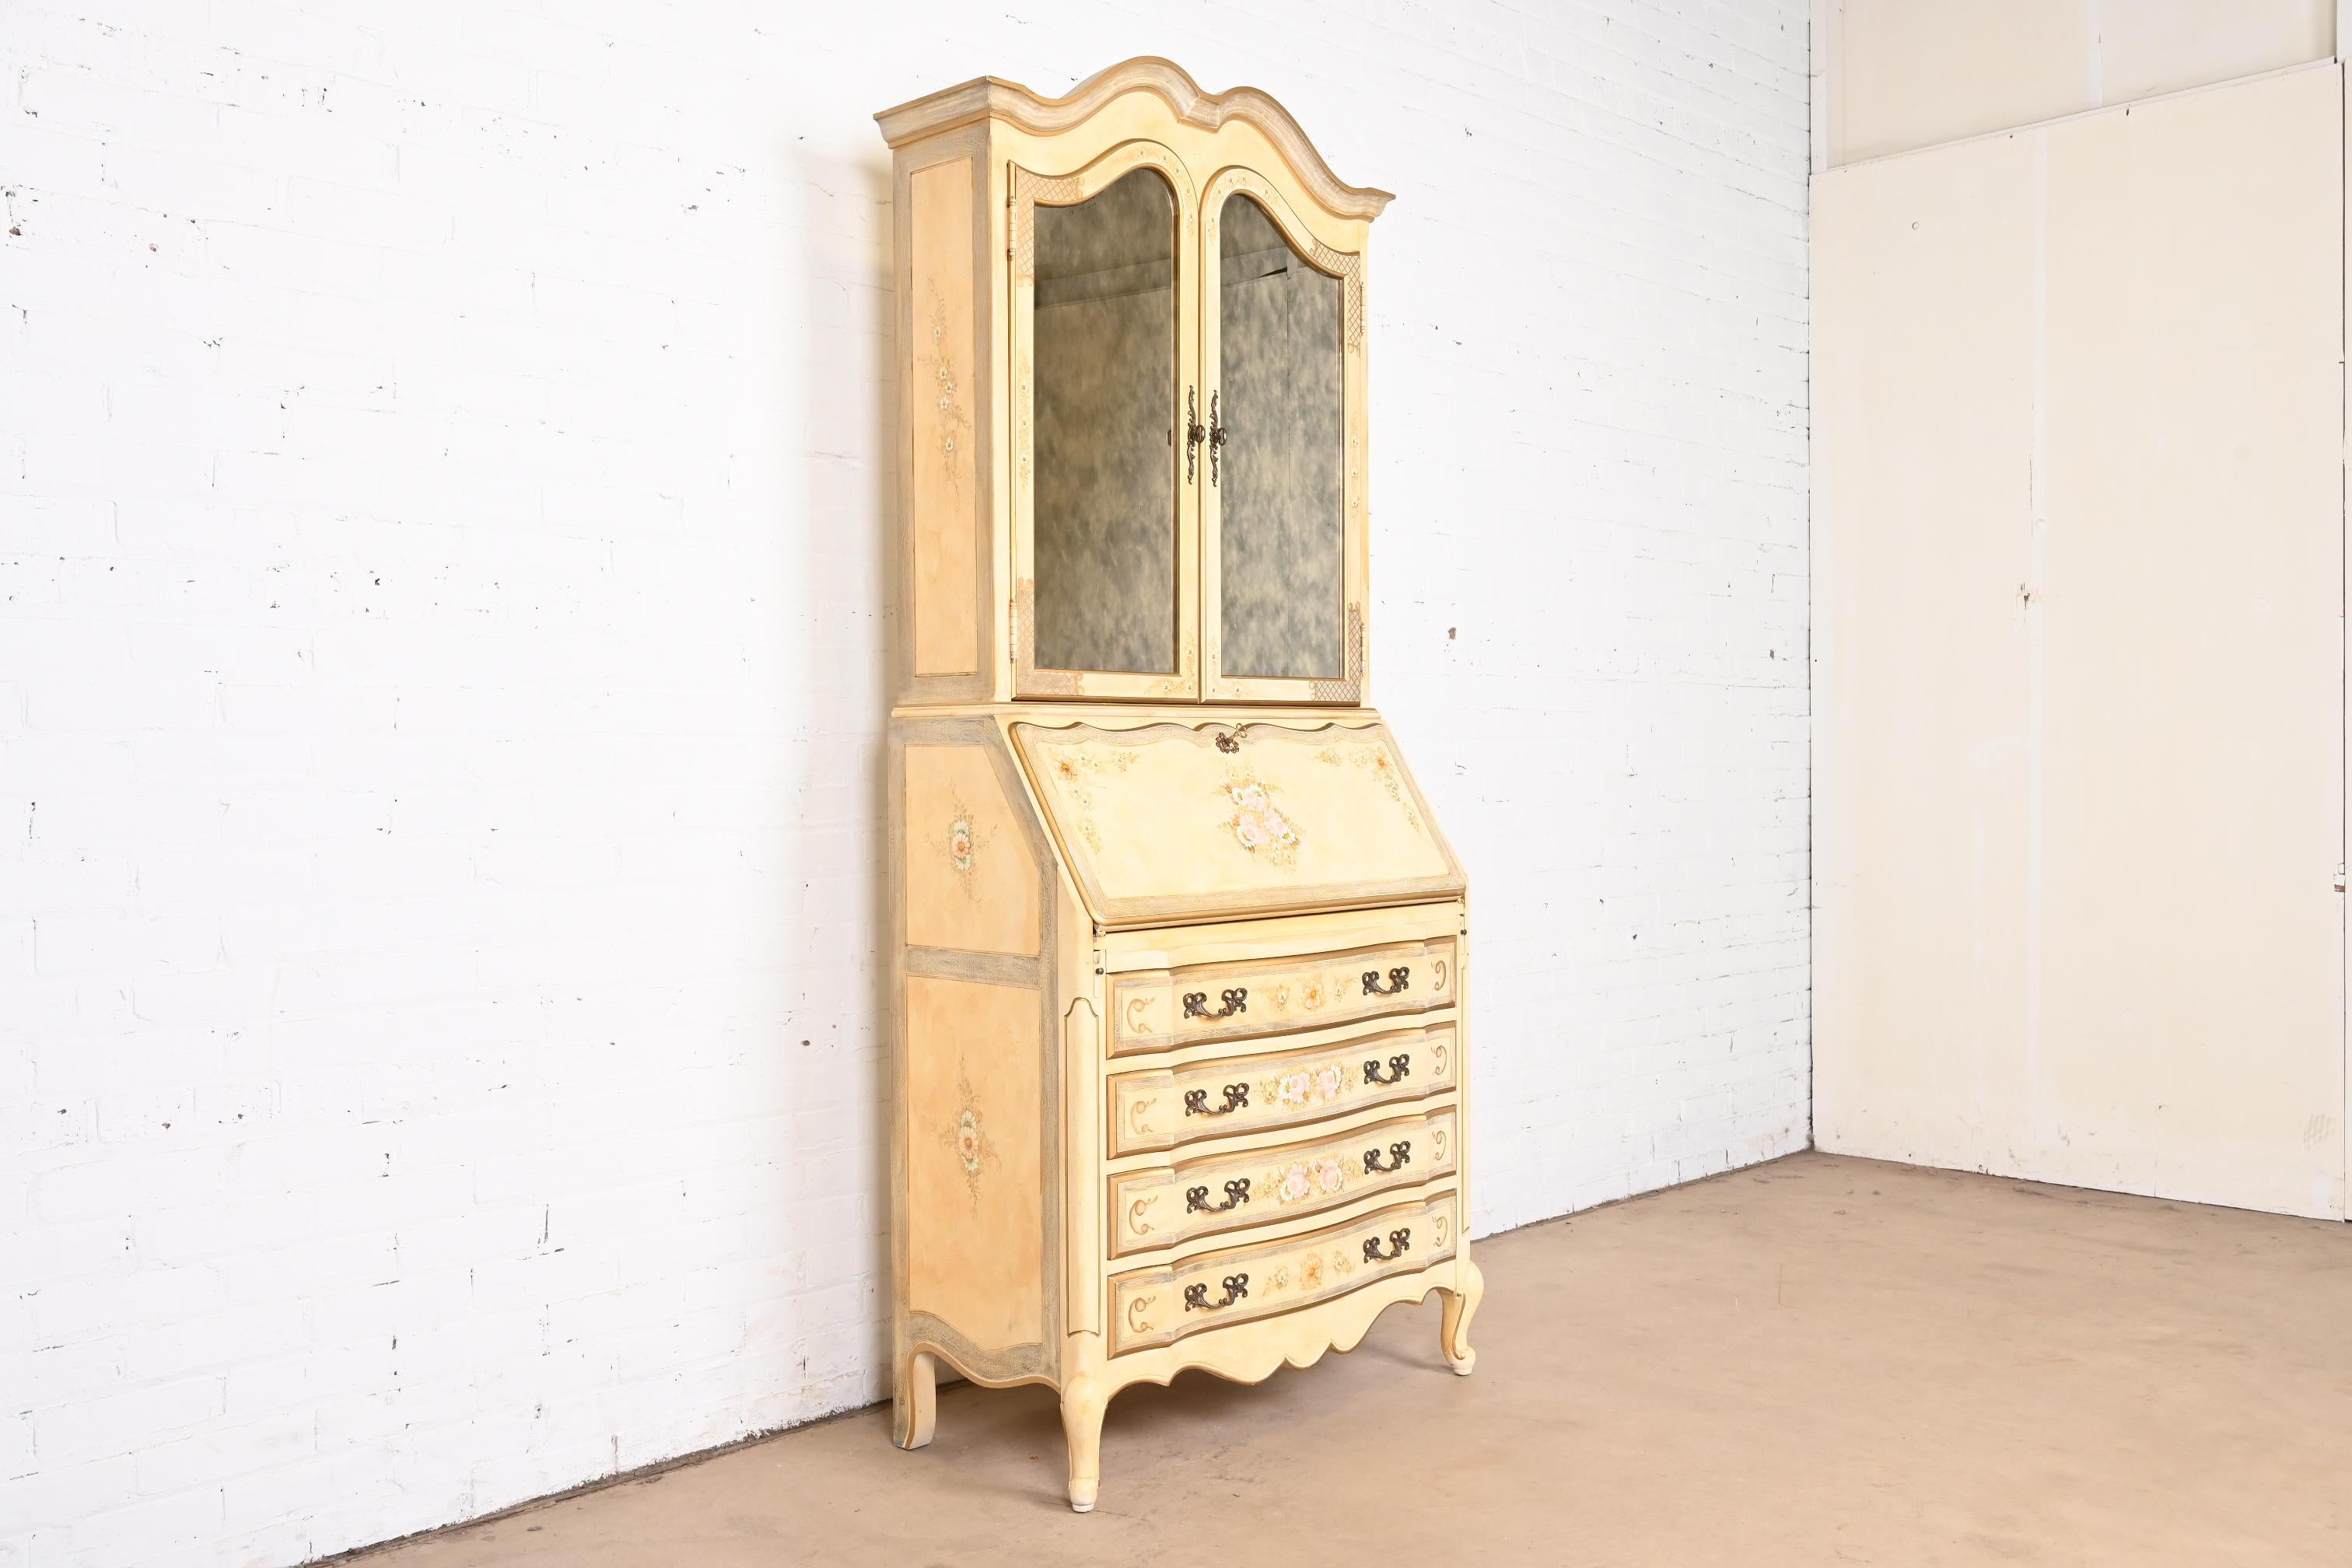 A gorgeous French Provincial Louis XV style bureau with drop front secretary desk and mirrored bookcase hutch top

By Maddox Furniture

USA, 1970s

Cream lacquered walnut, with hand-painted floral details, mirrored glass doors, and original brass